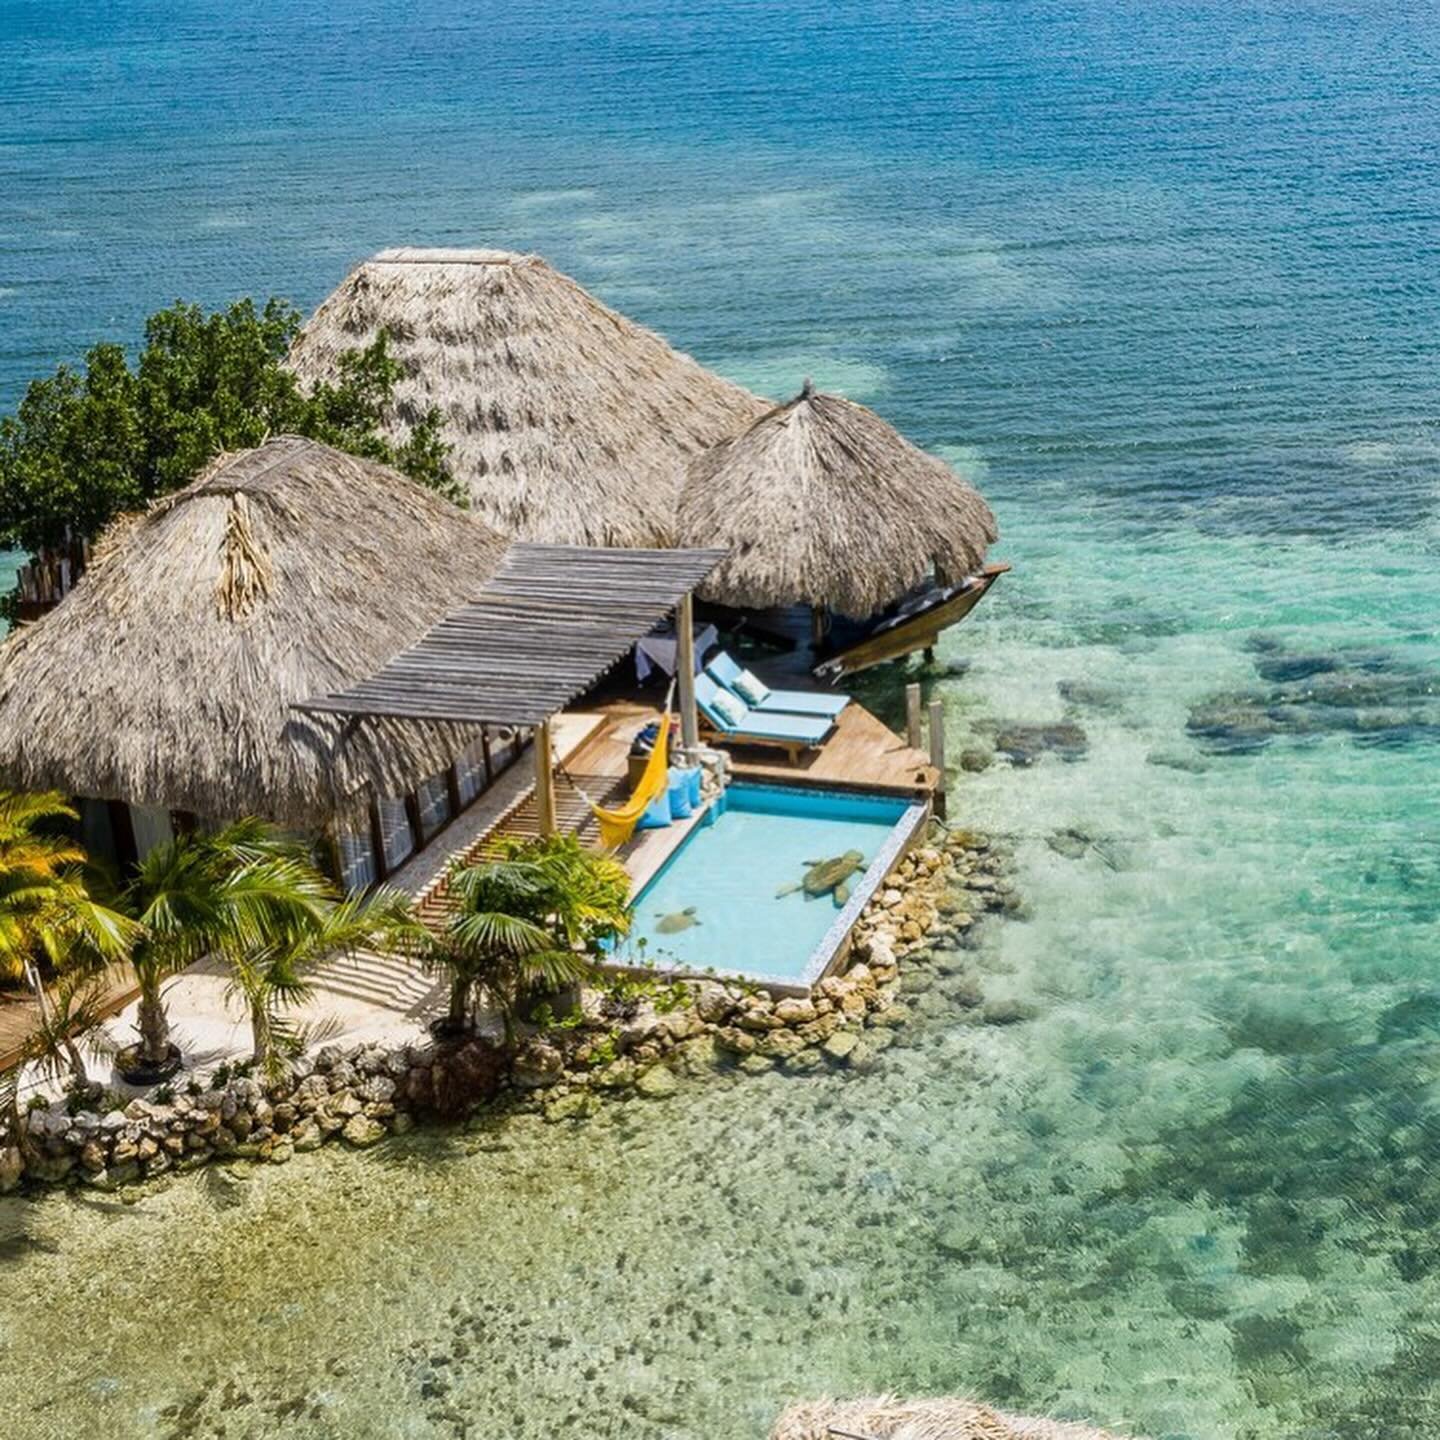 Aruba Ocean Villas features a limited collection of 7 individually-designed overwater villas and 5 beach bungalows. Each accommodation has been created with luxurious canopy beds, panoramic Caribbean Sea views, and a seamless connection to the natura